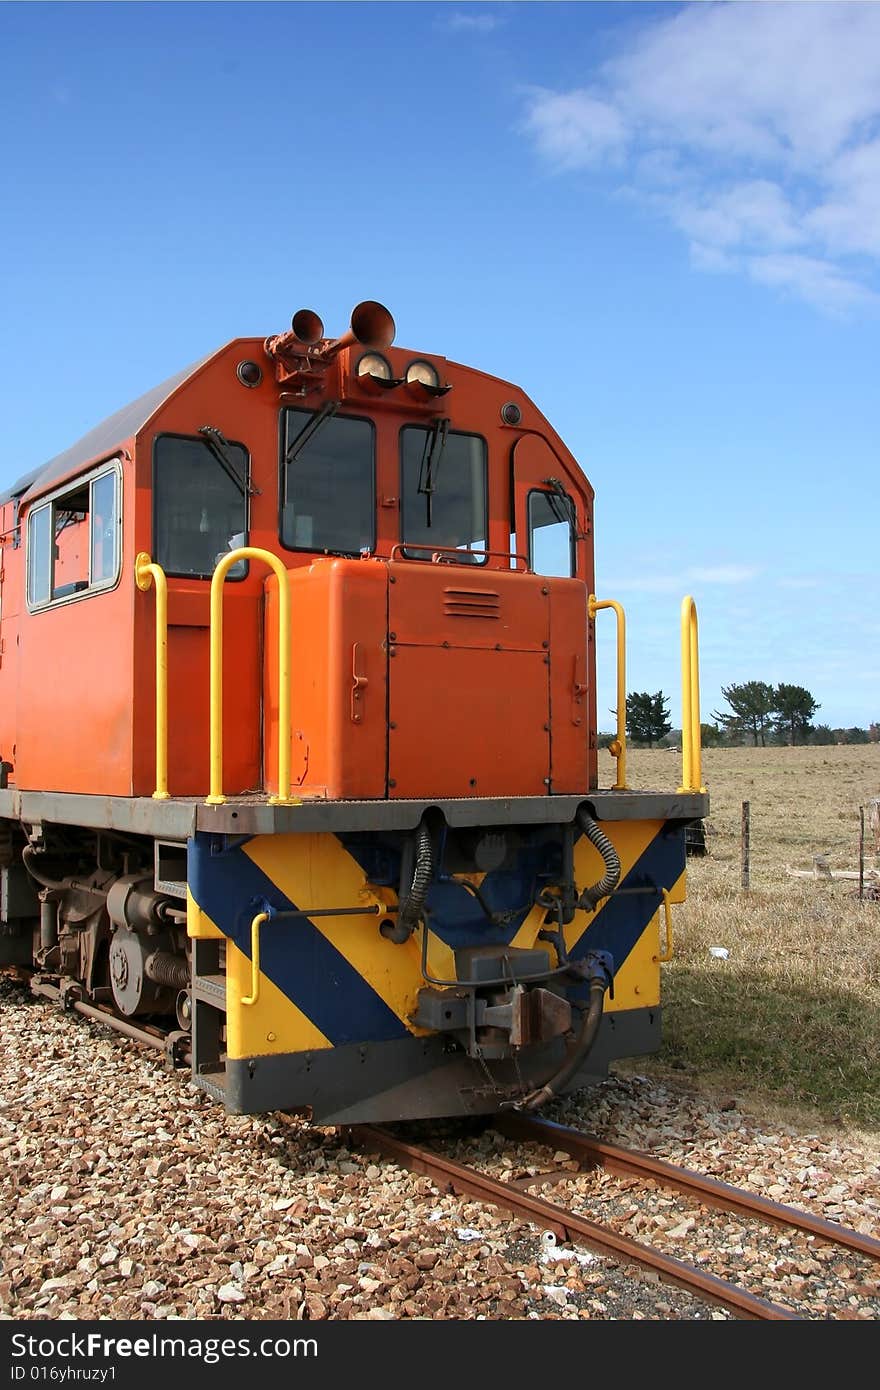 Orange train engine in the country side